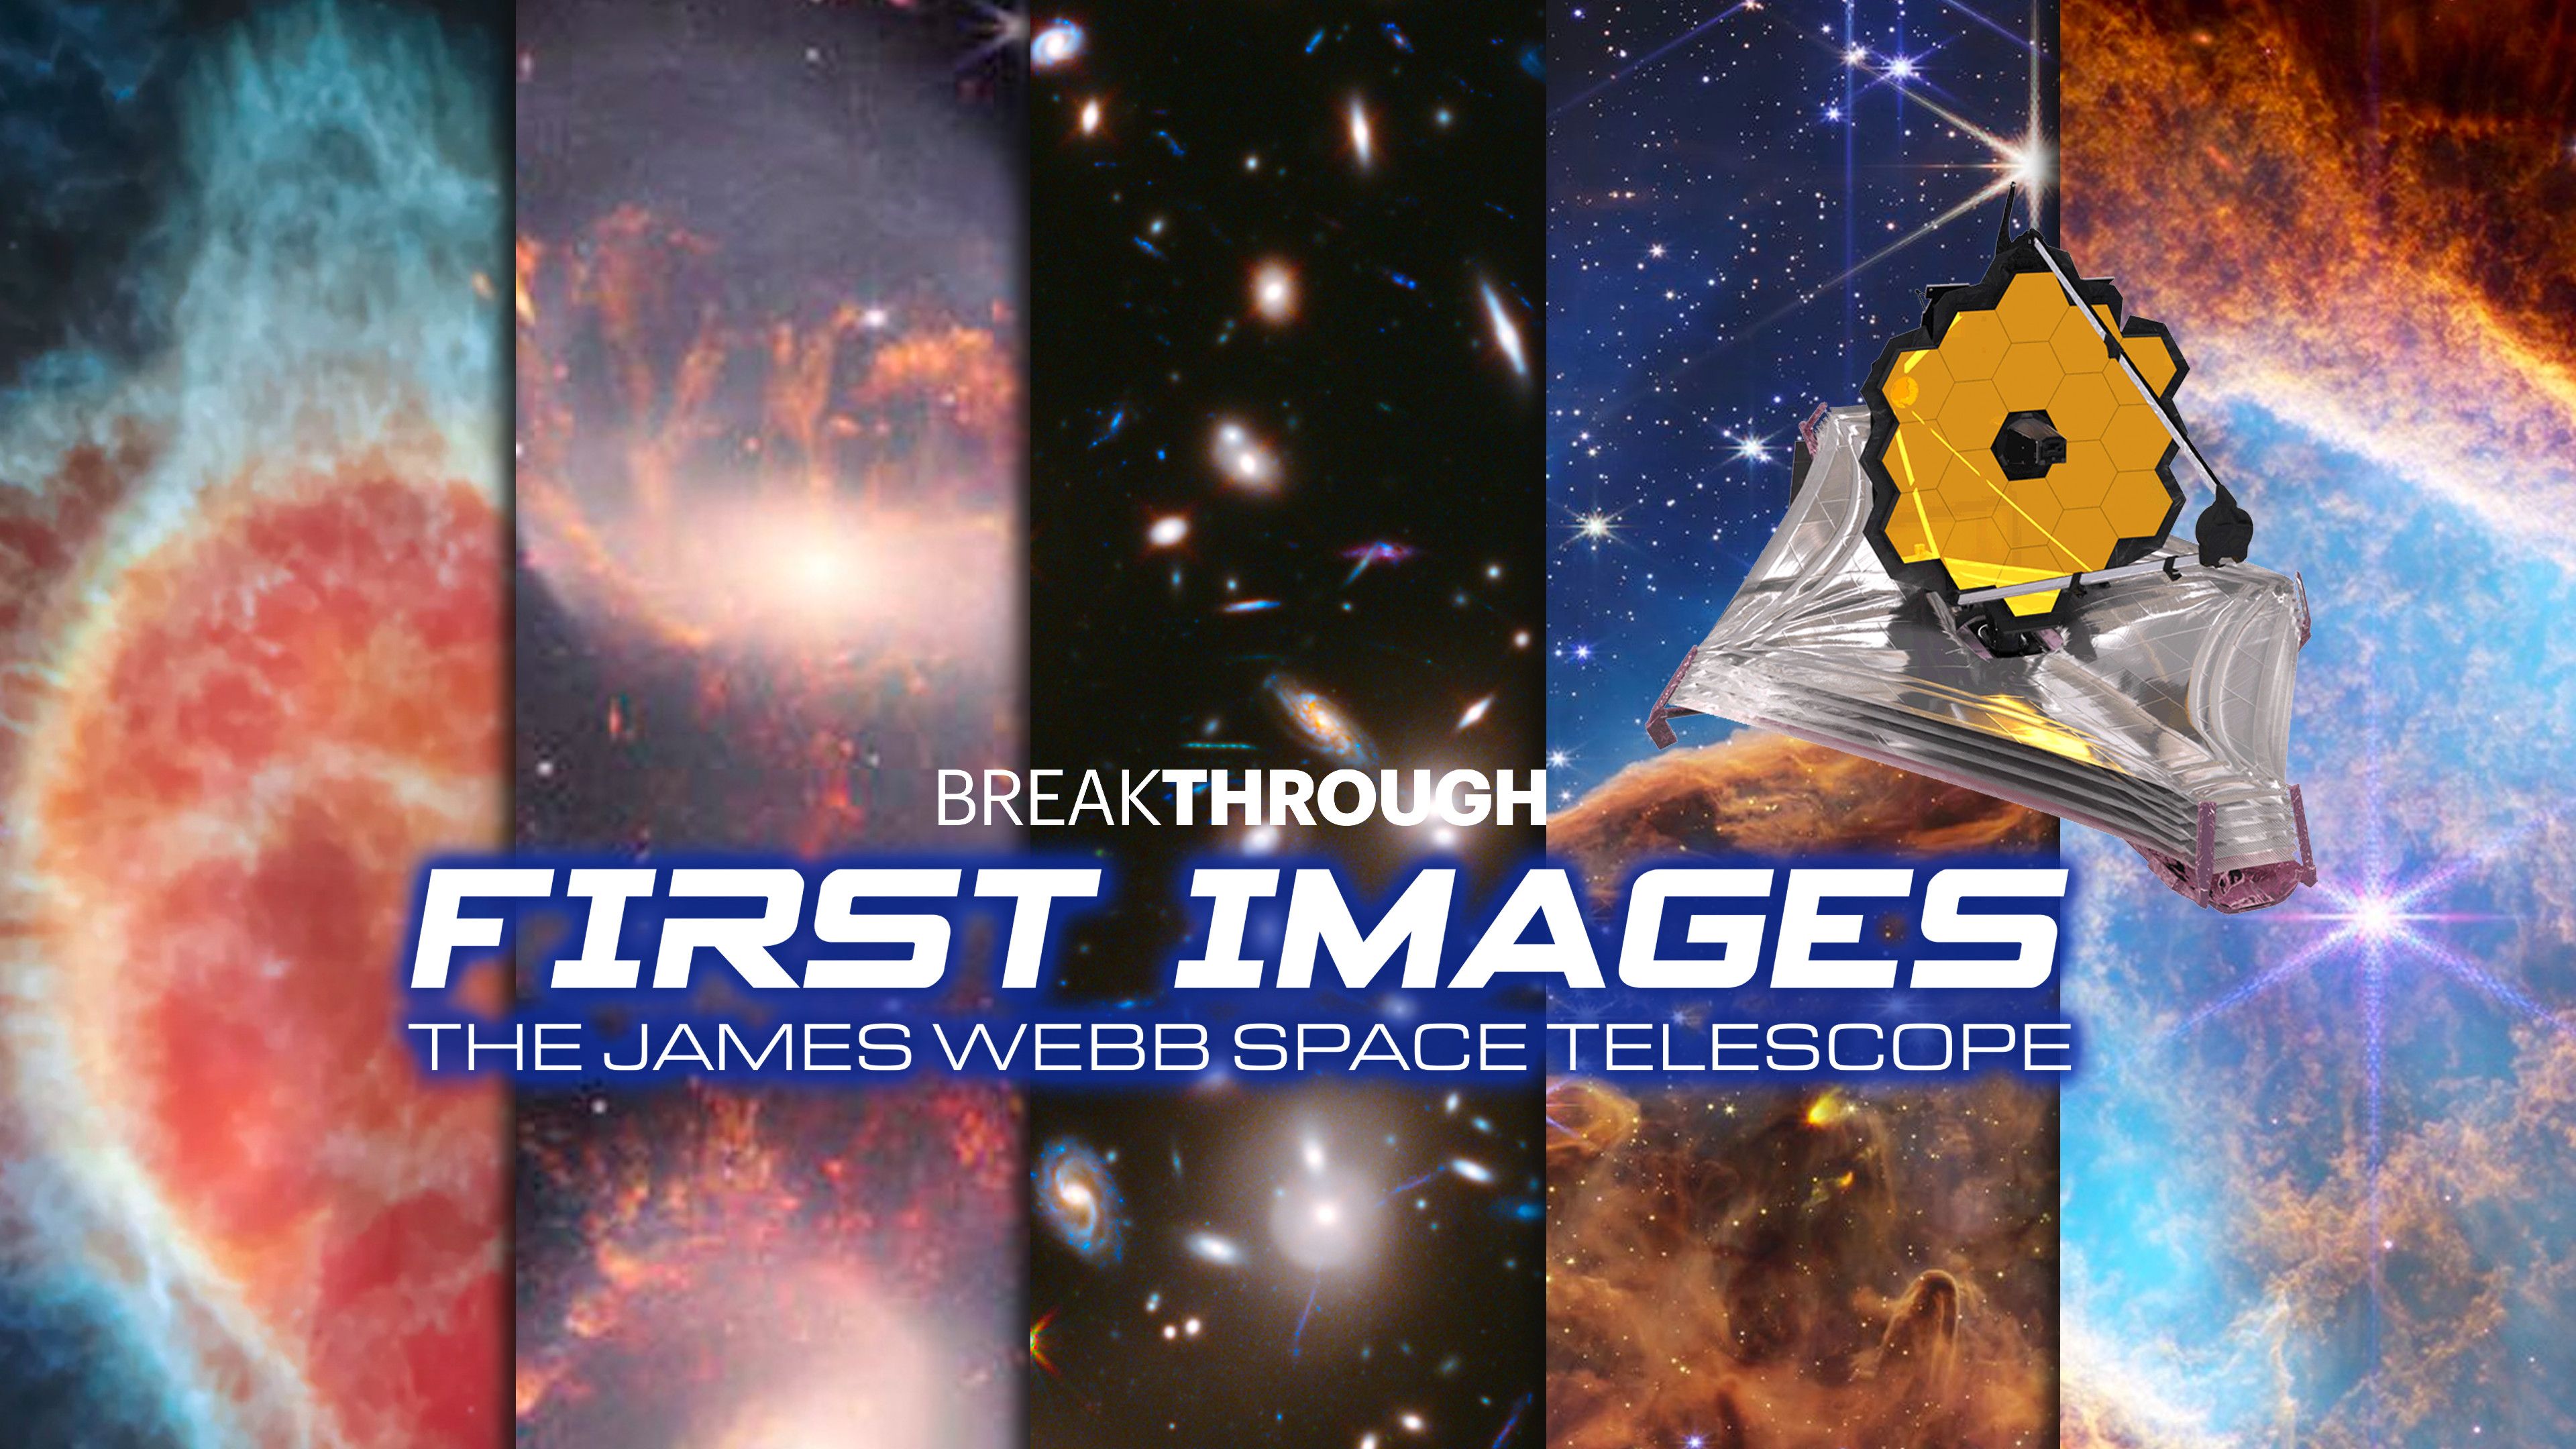 First Images: The James Webb Telescope